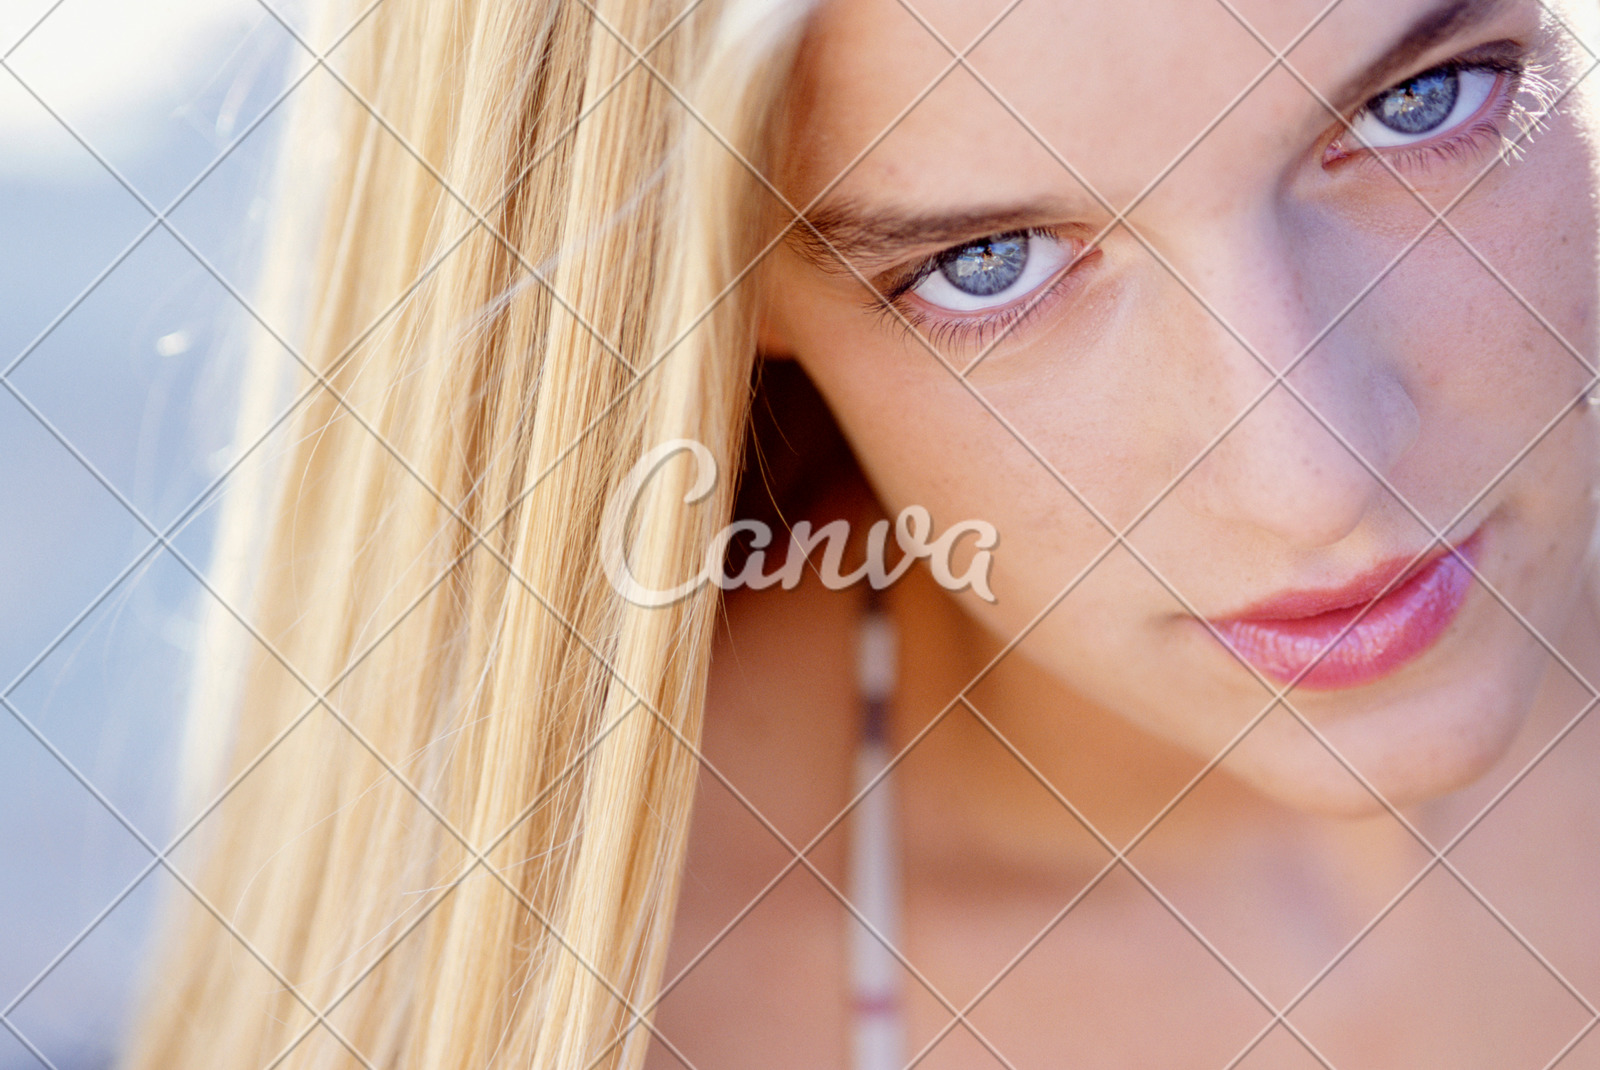 Young Woman With Blonde Hair And Blue Eyes Portrait Photos By